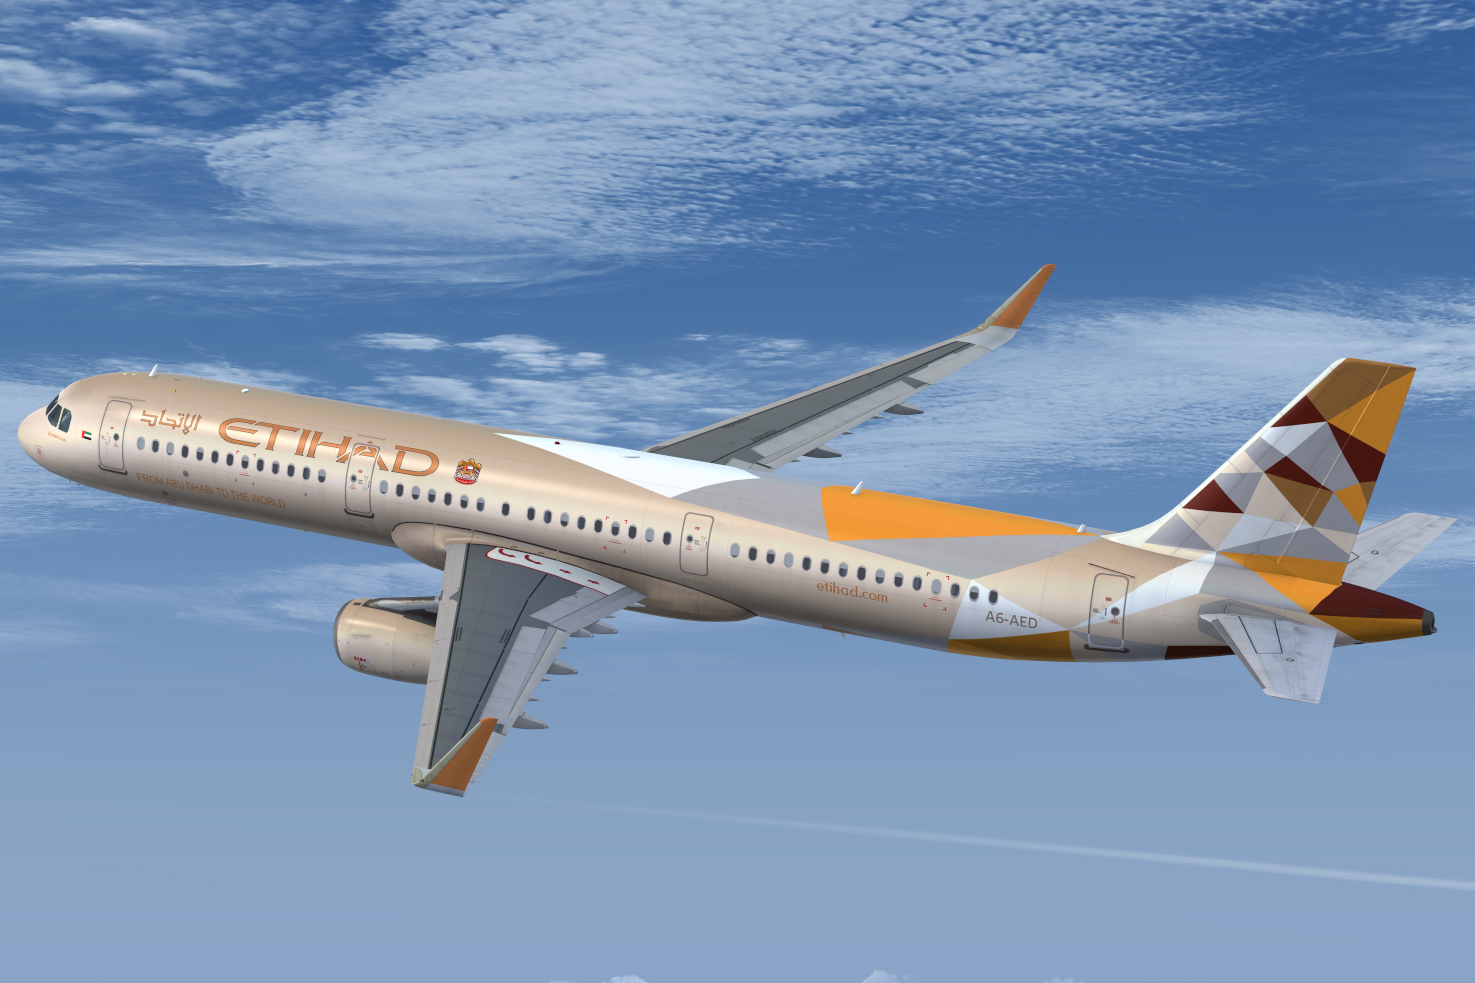 More information about "Airbus A321 NEO Etihad Airways - New Colors (A6-AED)"